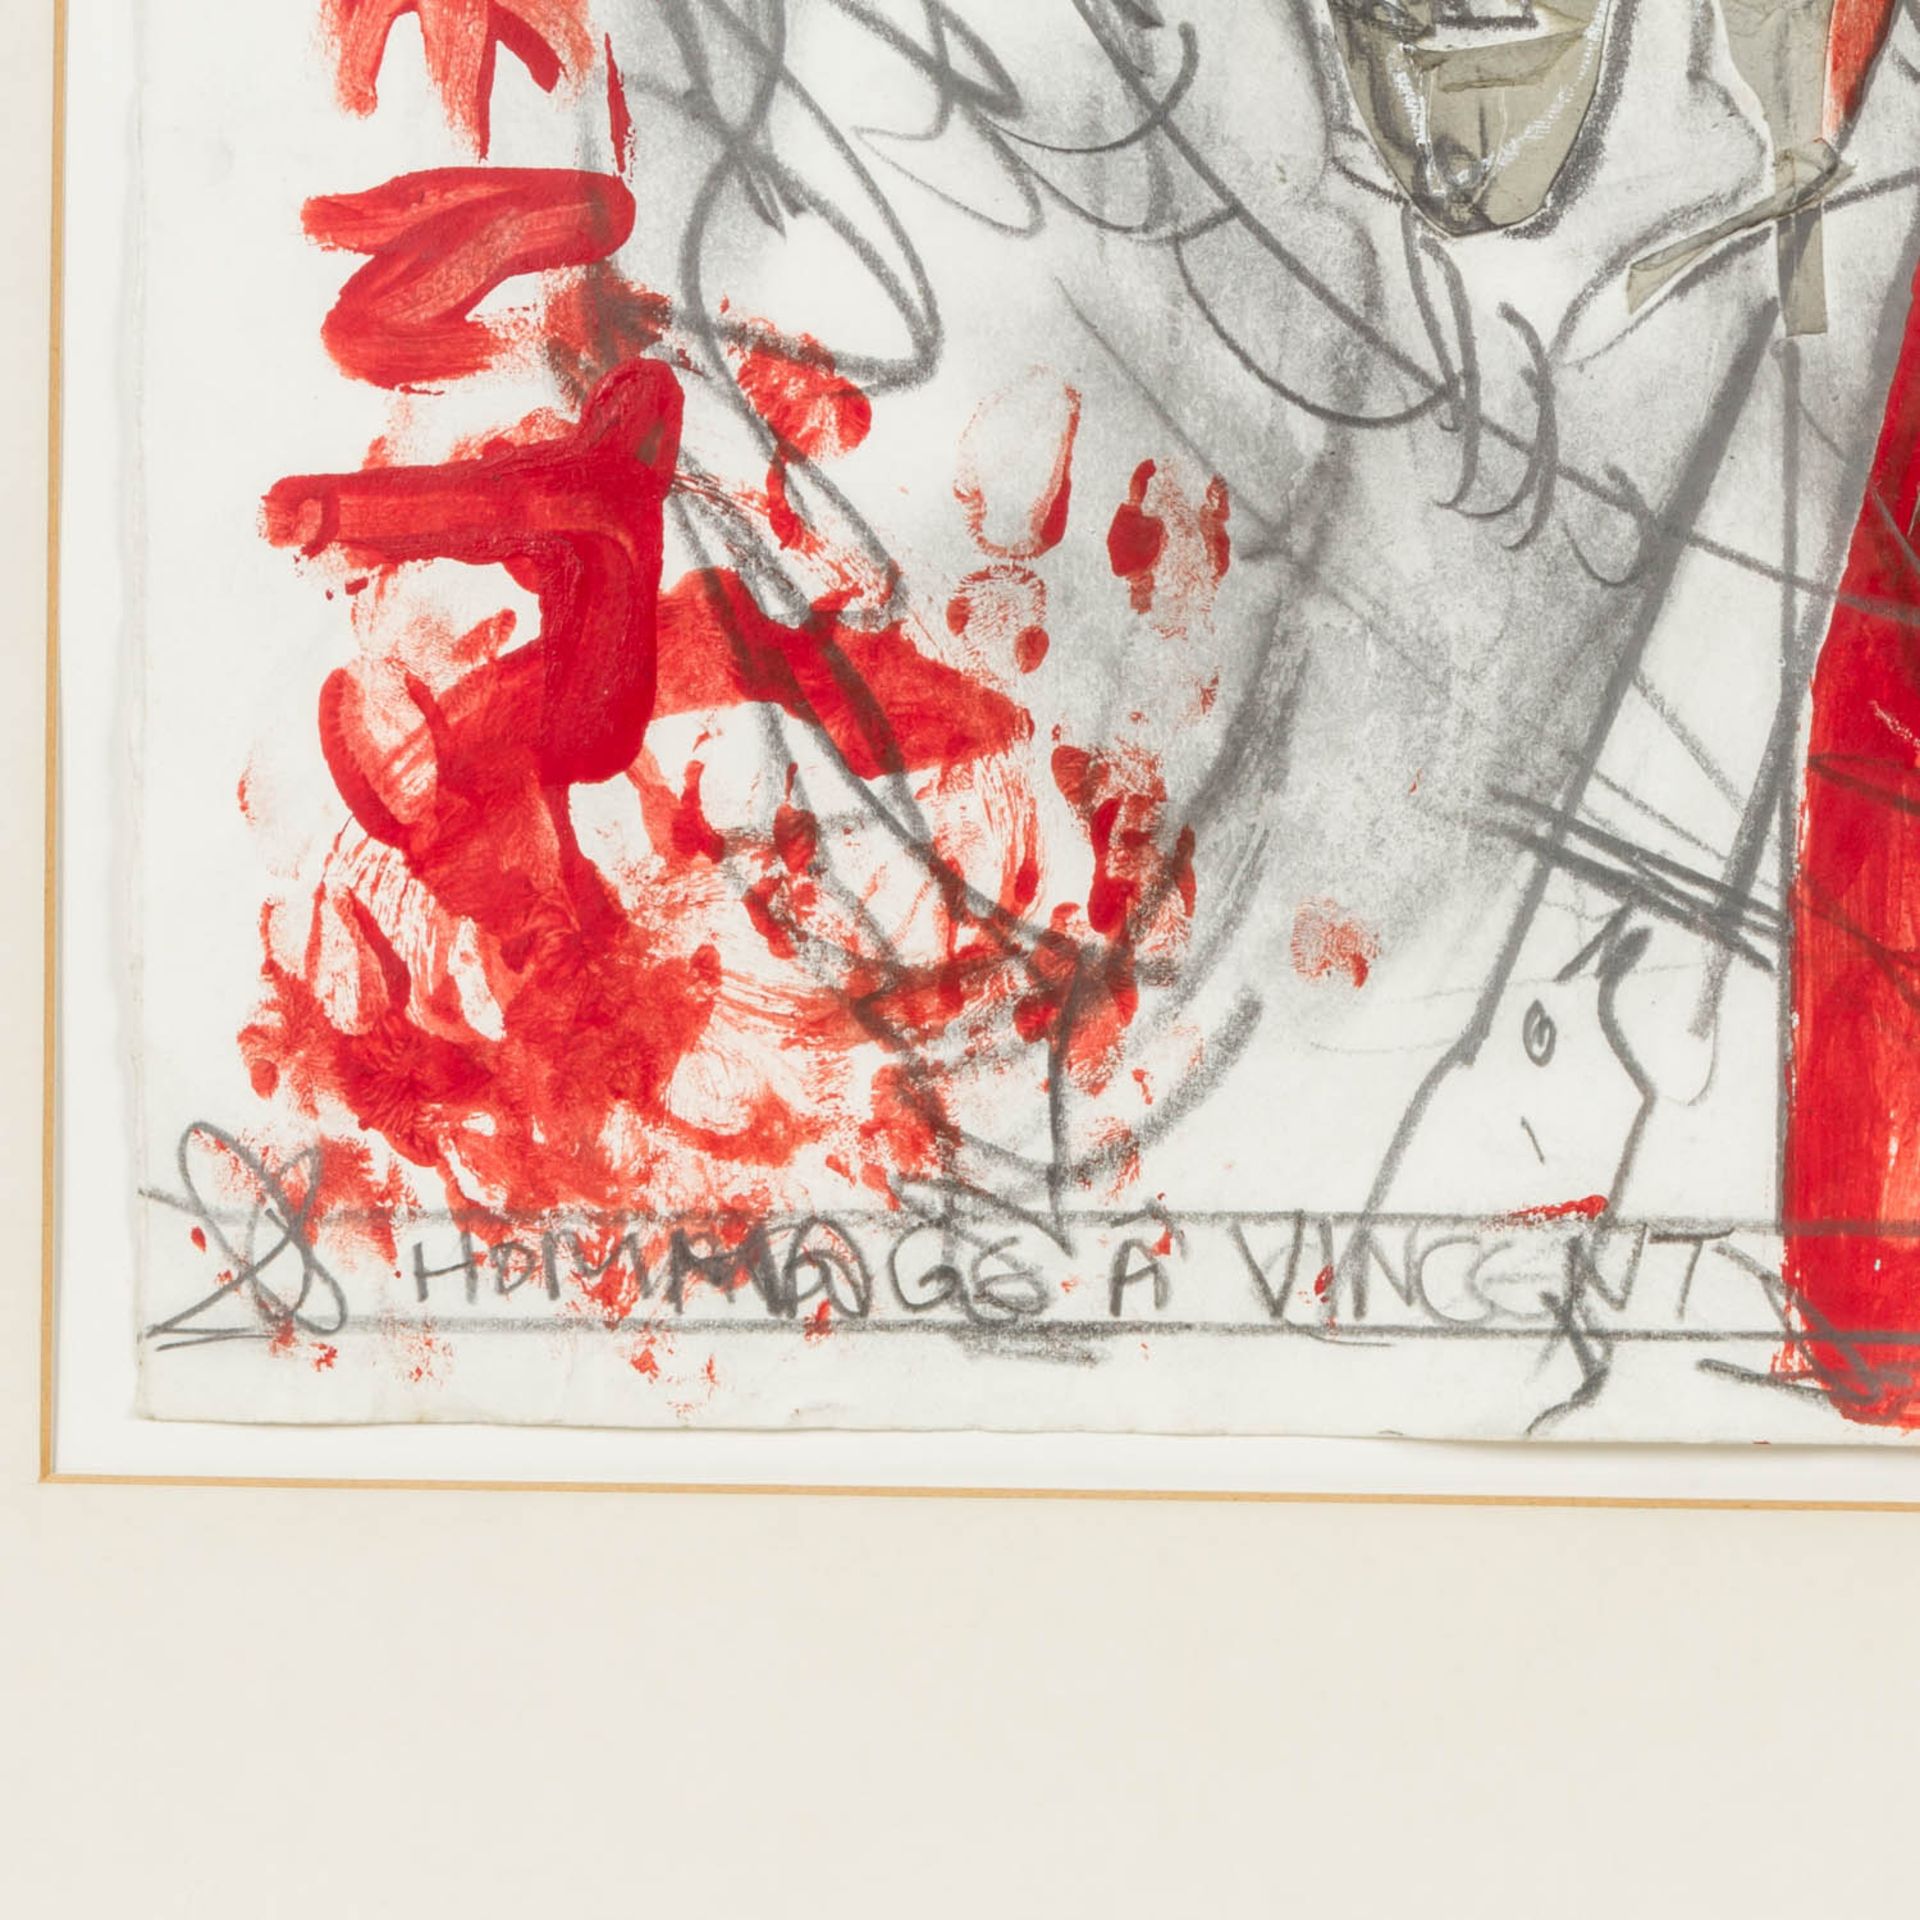 TUMARKIN, IGAEL (auch Yigal, 1933-2011), "Hommage à Vincent", 1983, - Image 4 of 5